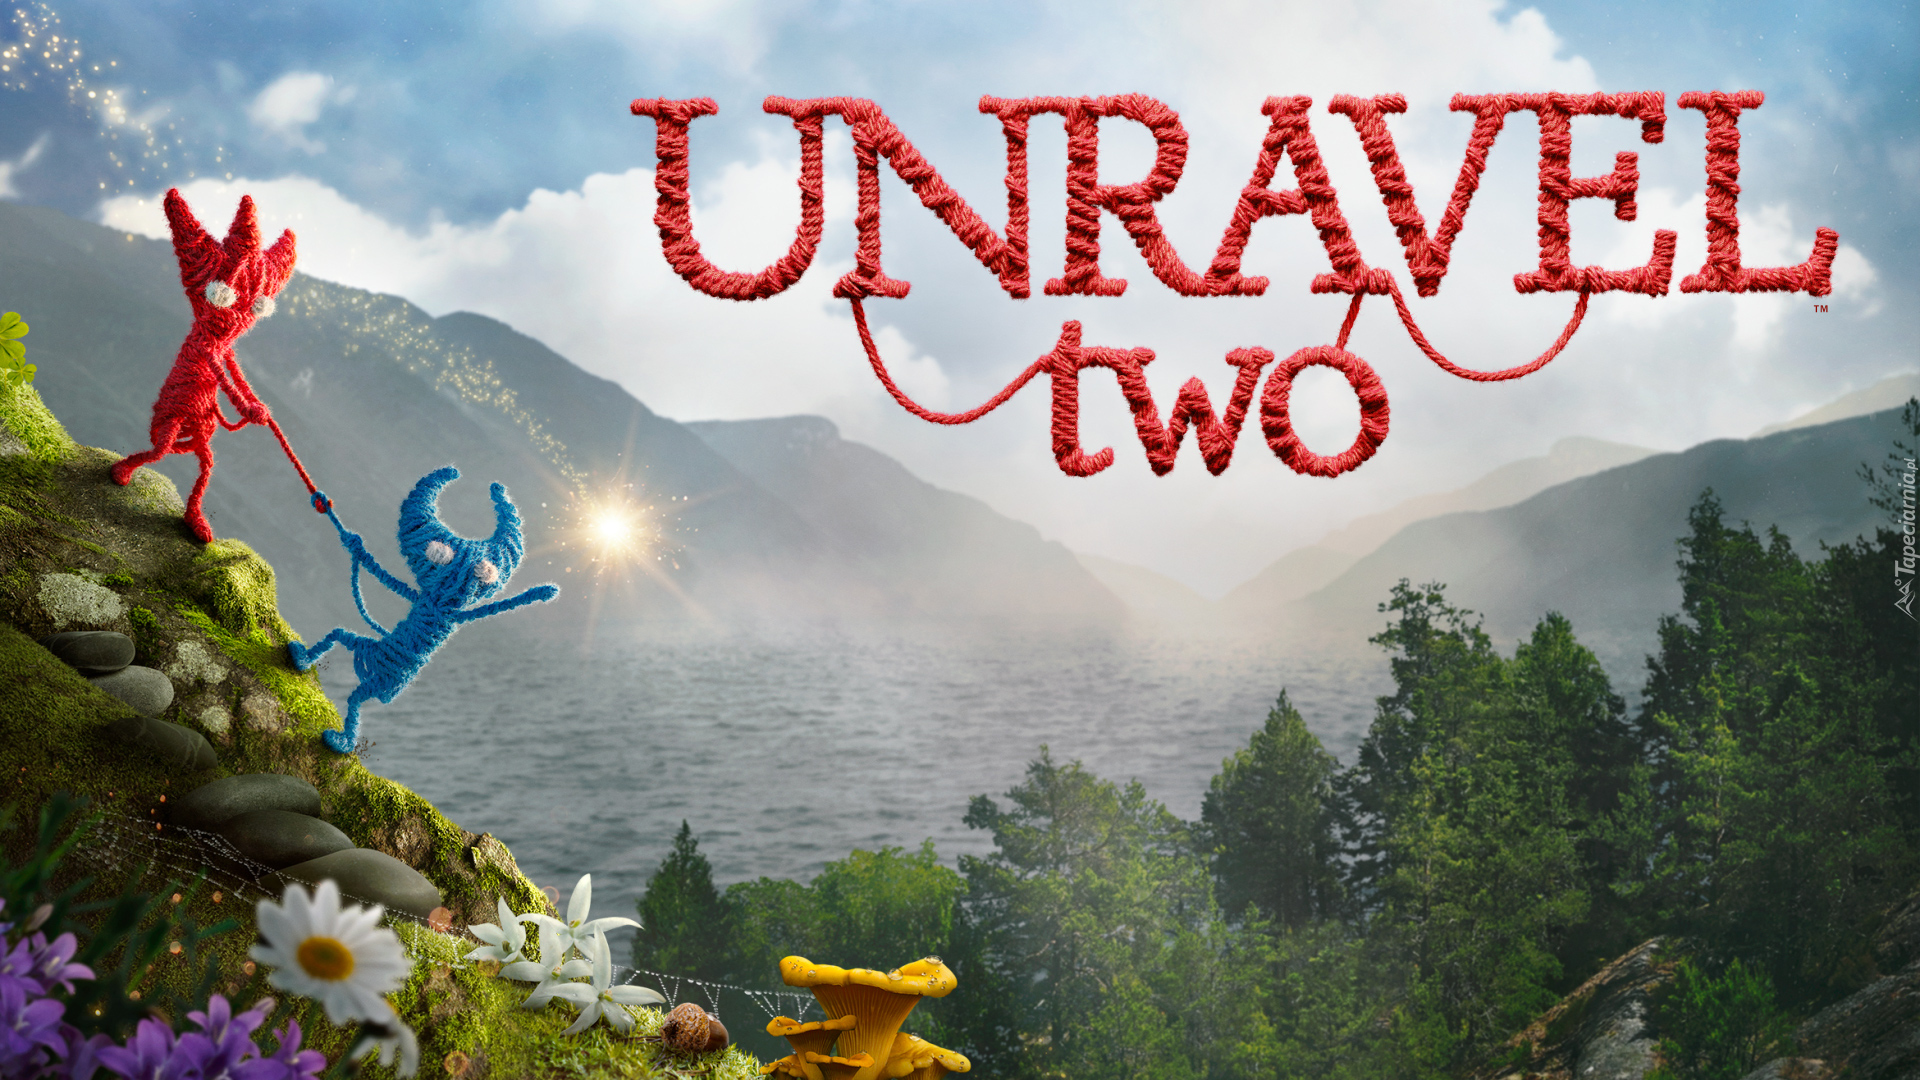 Gra, Unravel 2 Two